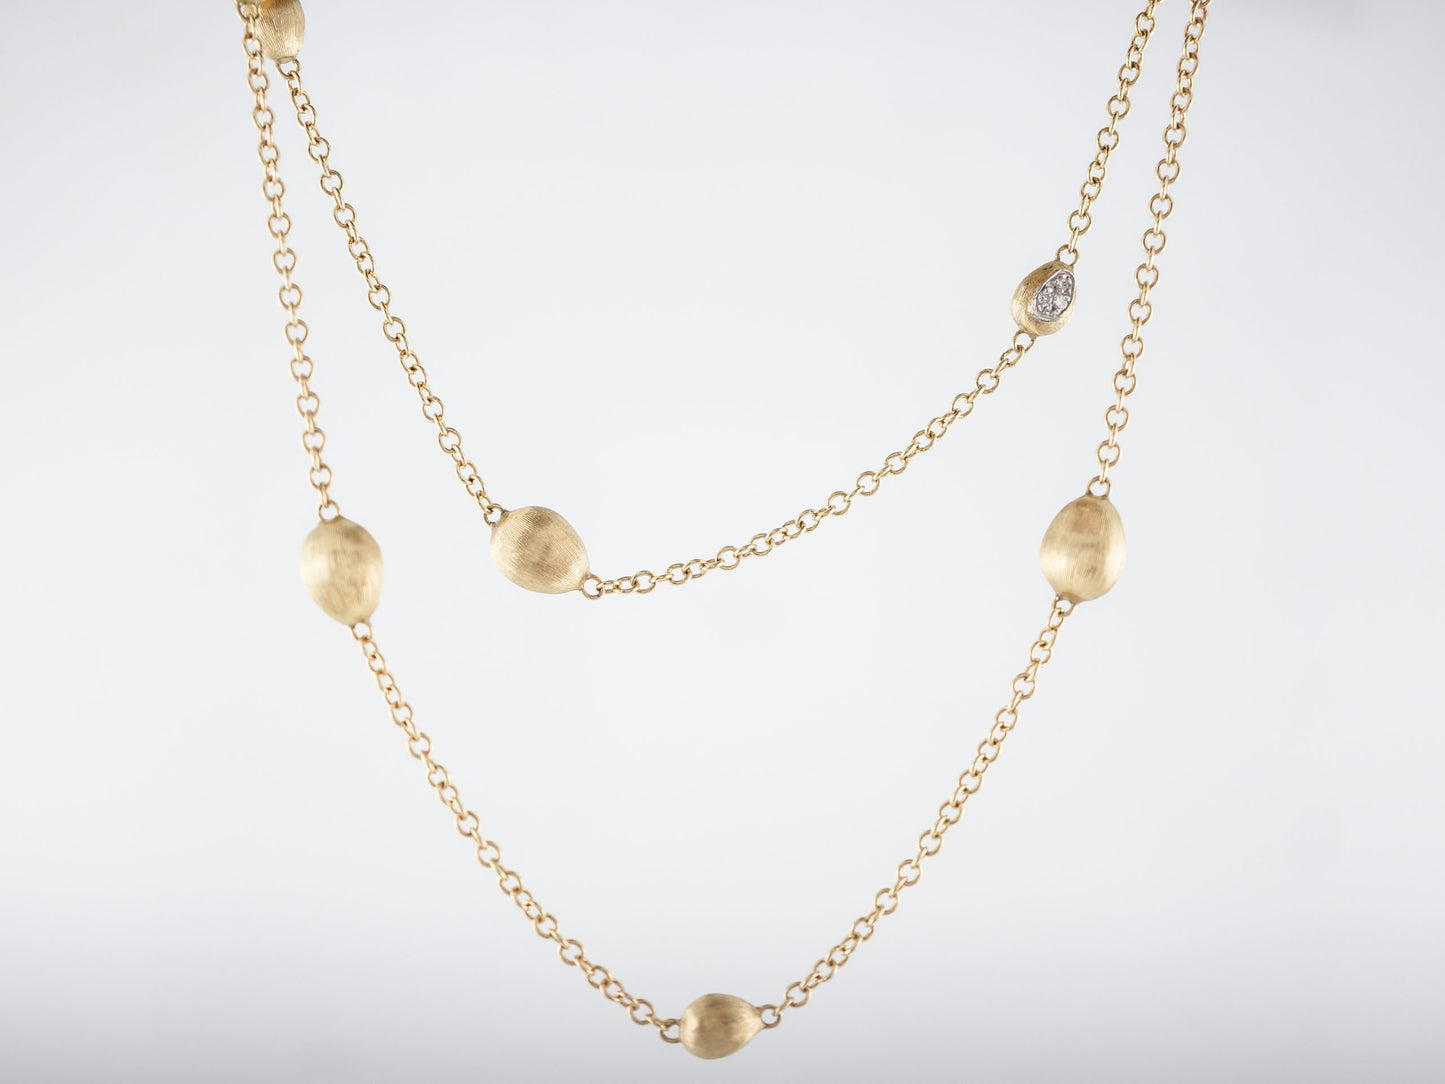 Modern Marco Bicego Necklace .36 Round Brilliant Cut Diamonds in 18k Yellow Gold